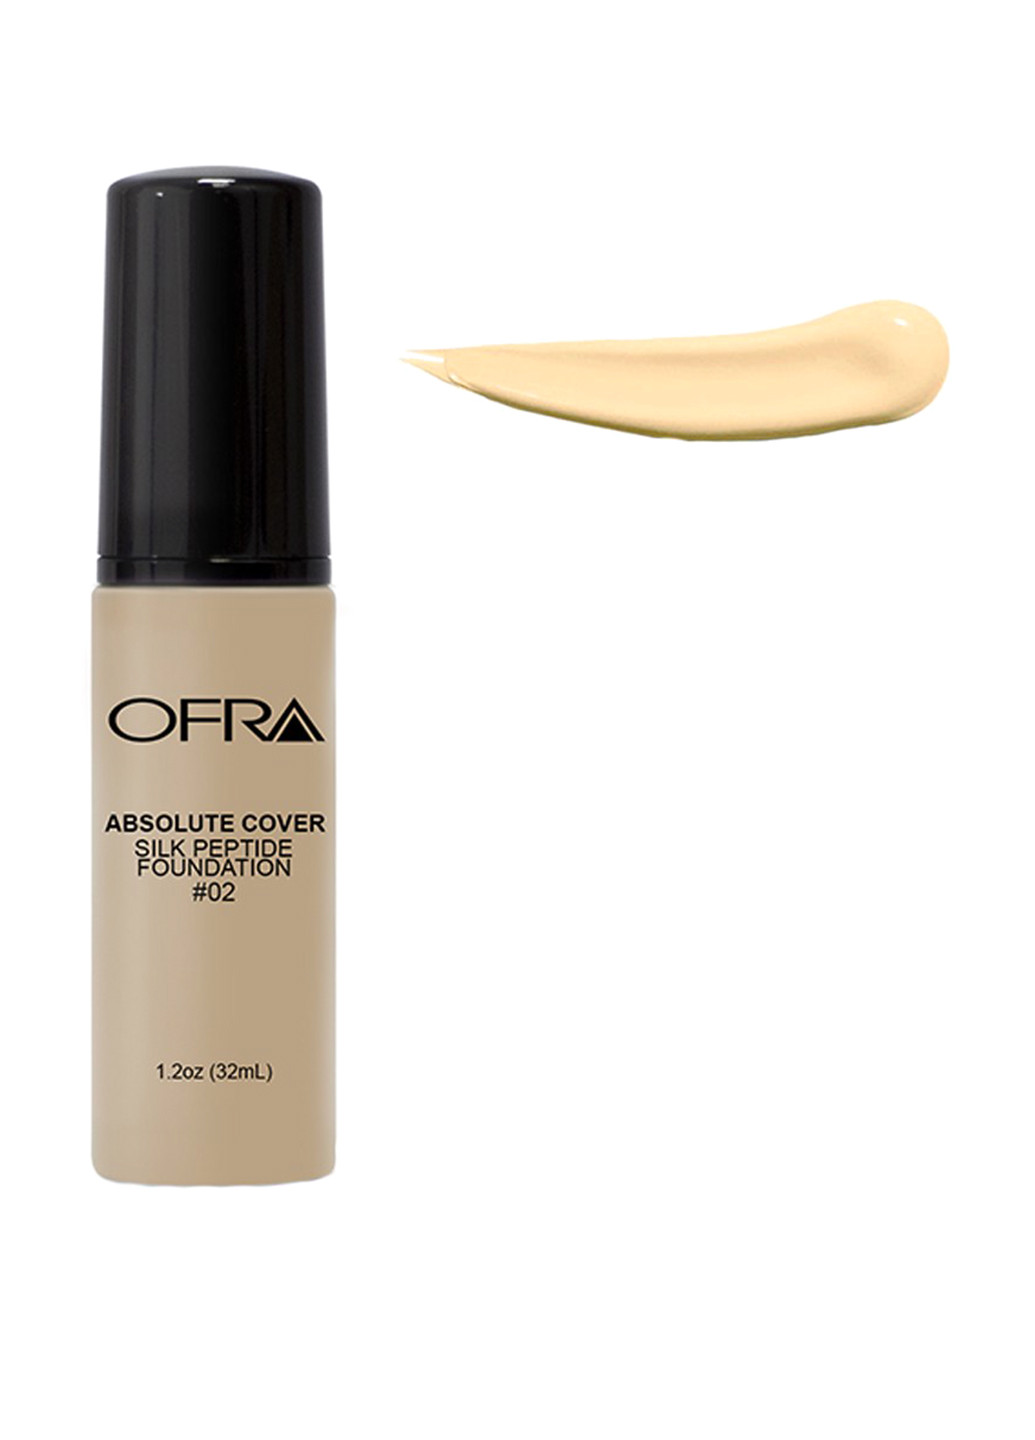 Тональна основа Absolute Cover Silk Peptide Foundation №02, 36 мл Ofra (74510488)